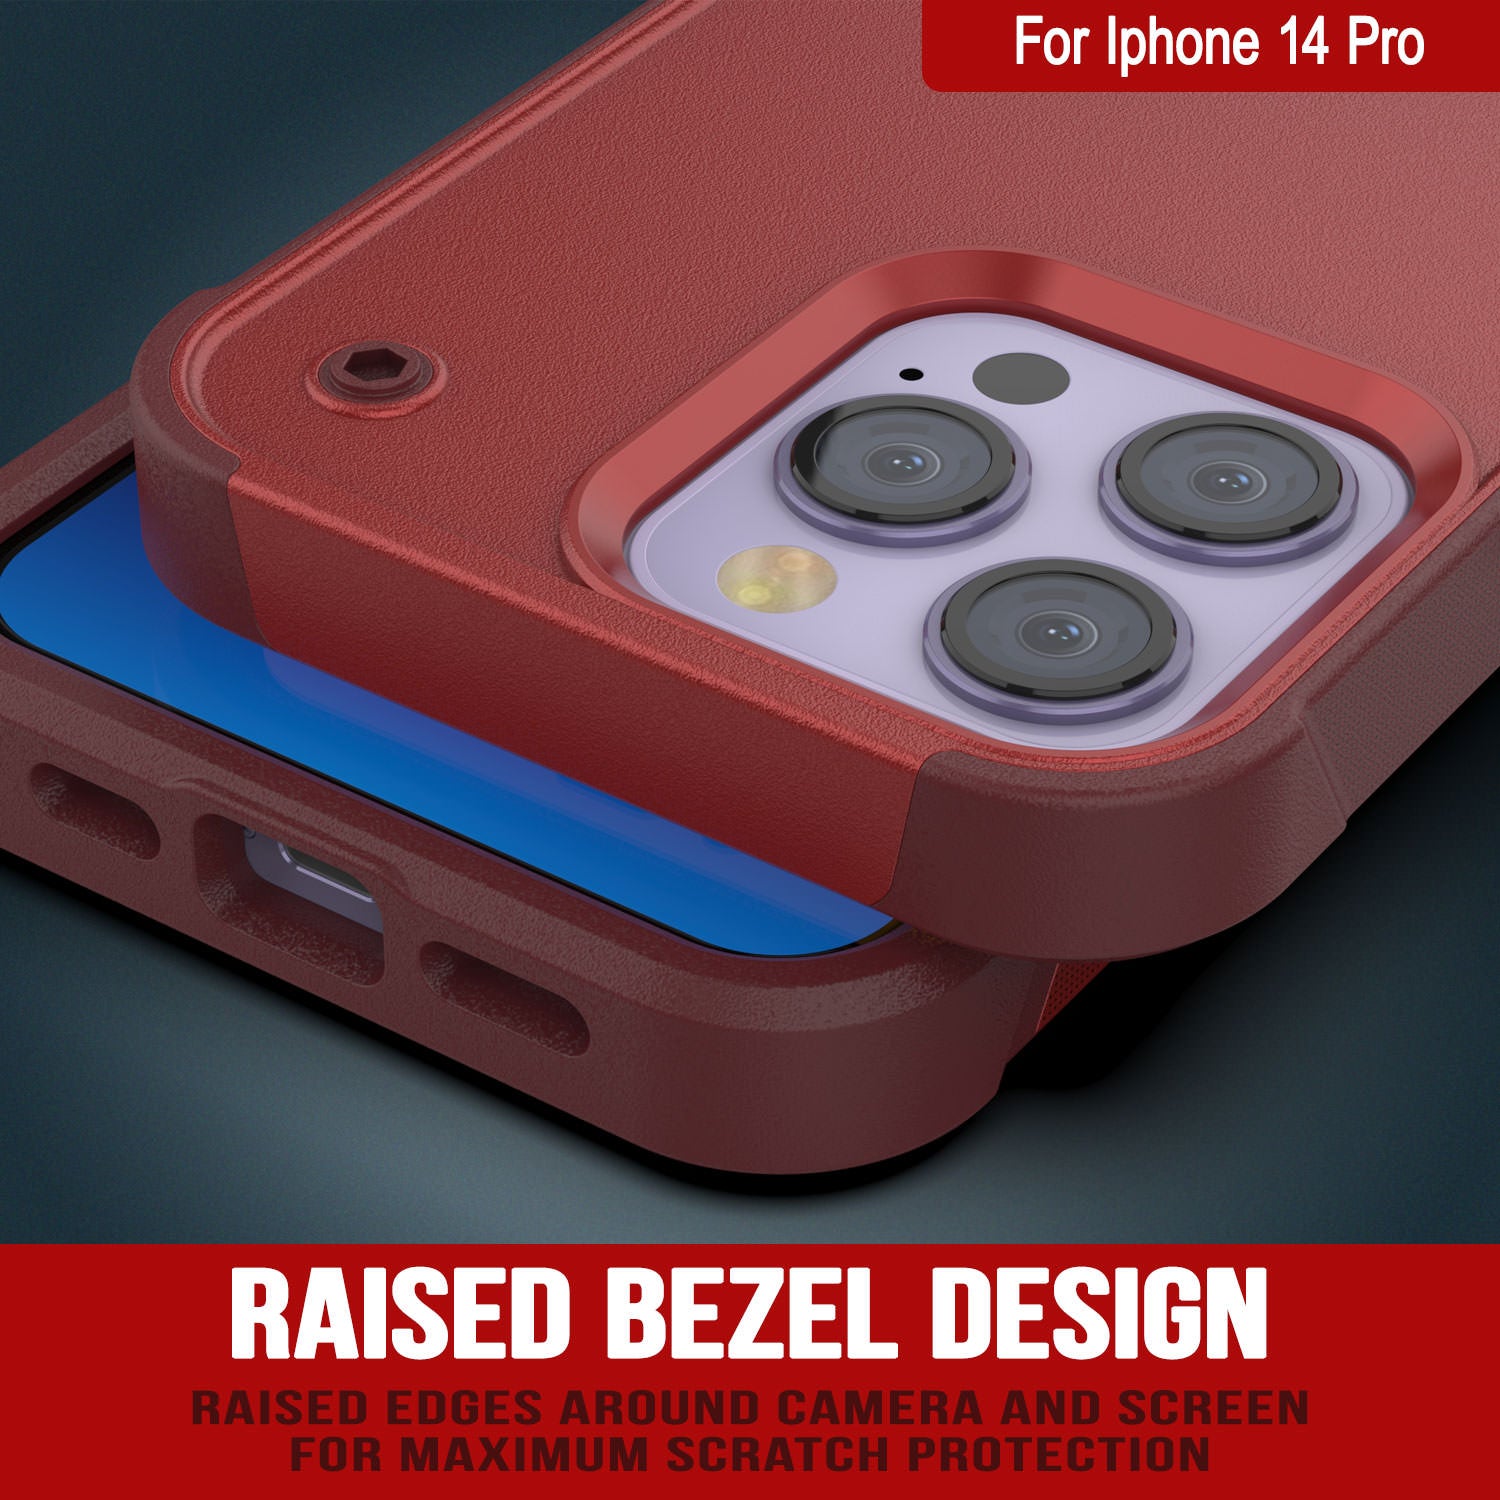 Punkcase iPhone 14 Pro Case [Reliance Series] Protective Hybrid Military Grade Cover W/Built-in Kickstand [Red-Rose]